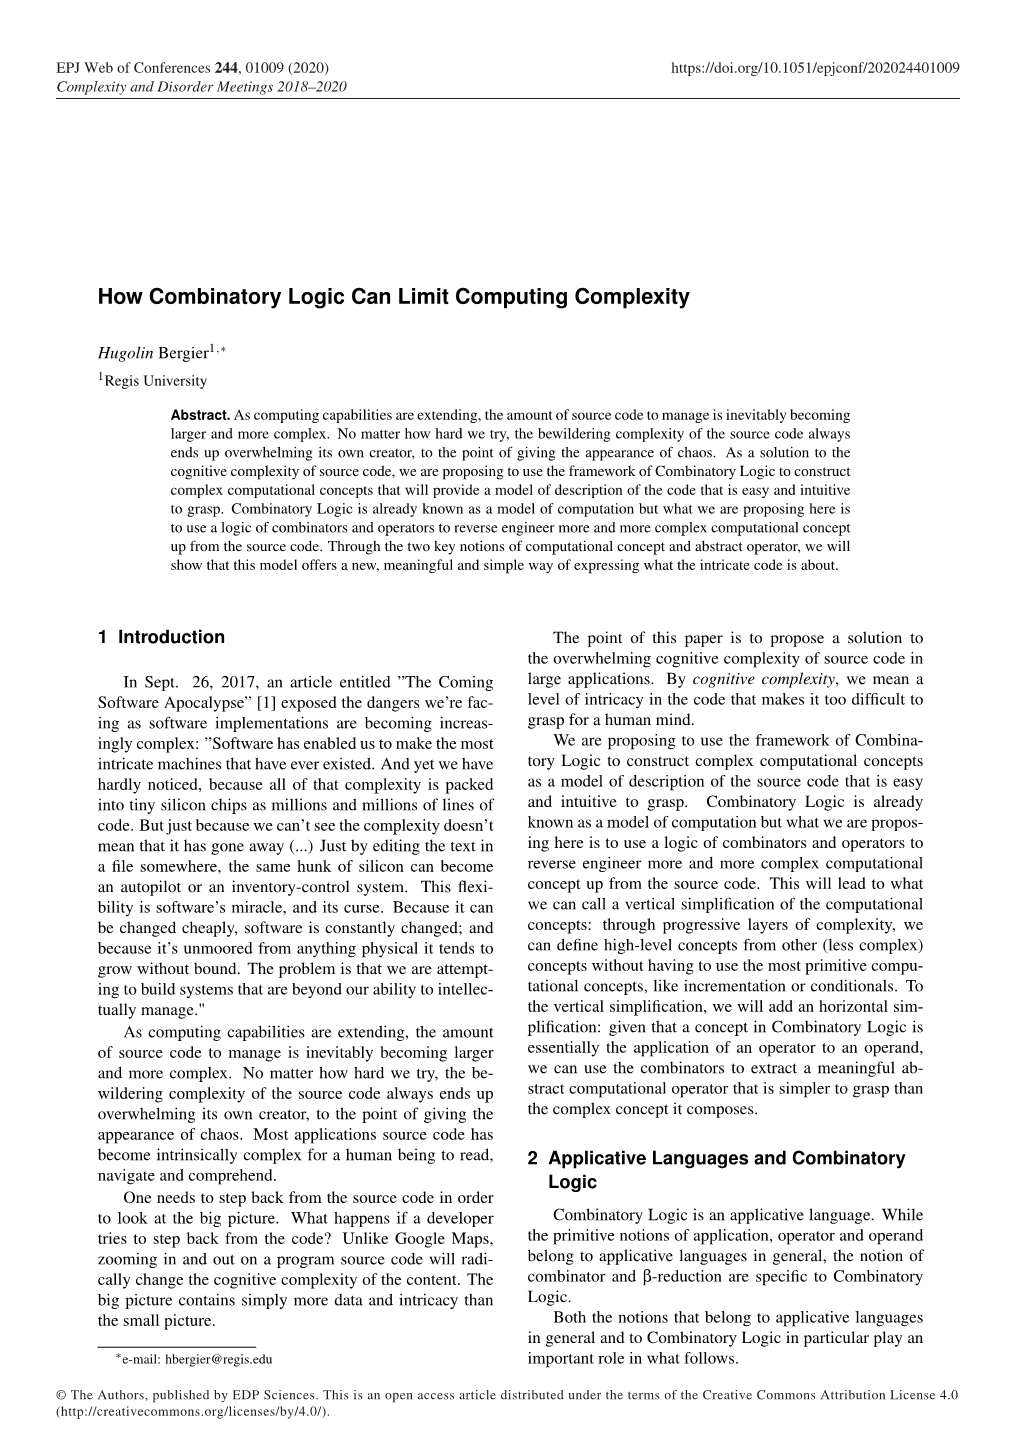 How Combinatory Logic Can Limit Computing Complexity